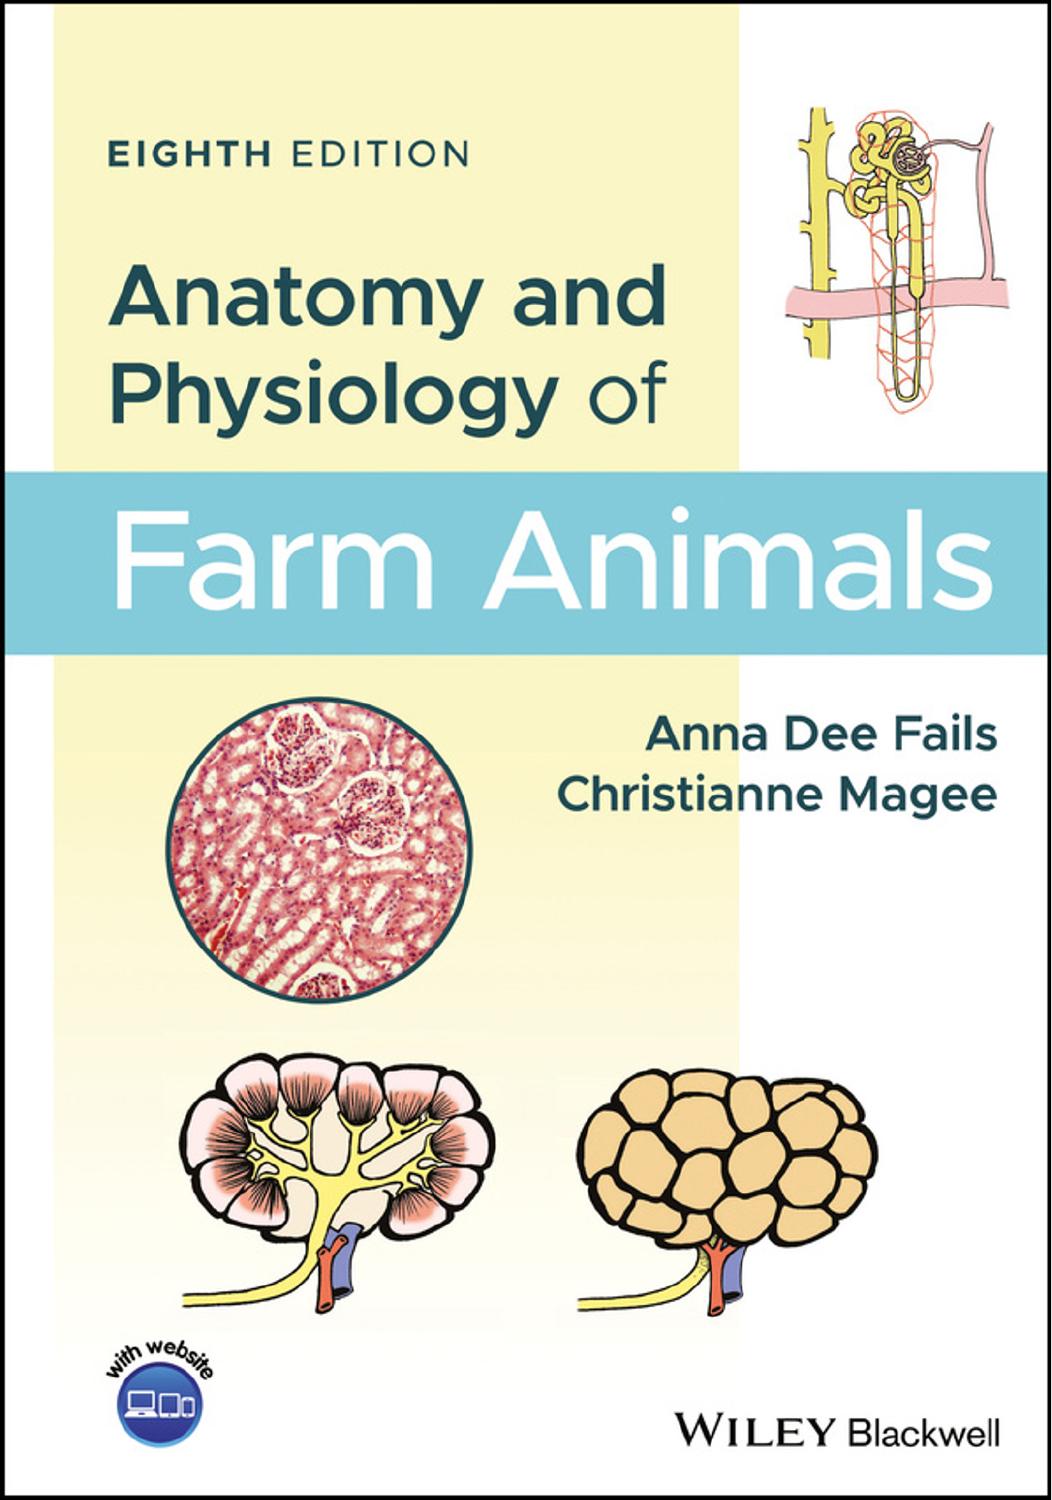 ANATOMY AND PHYSIOLOGY OF: Farm Animals by Anna Dee Fails and Christianne Magee